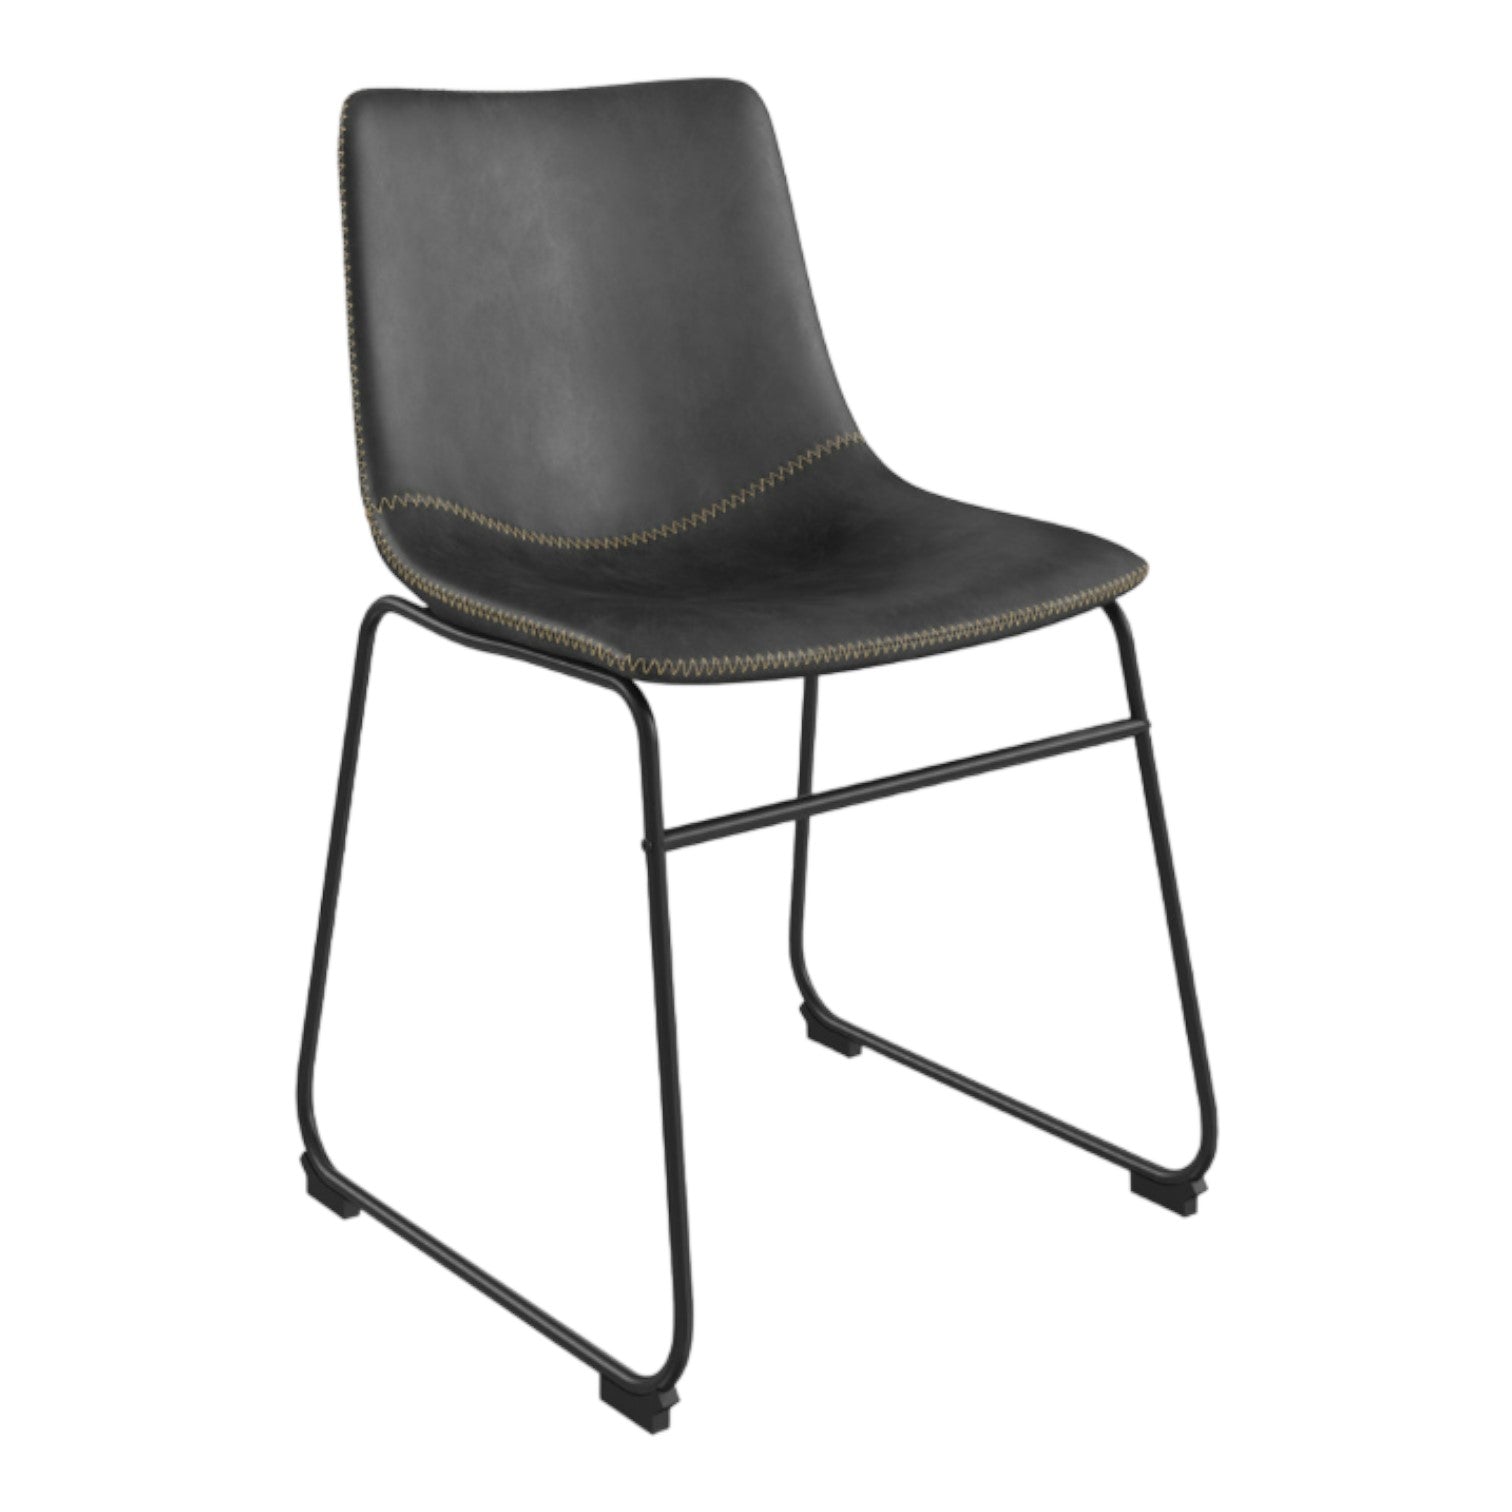 Picture of Pietro Caramel Chair